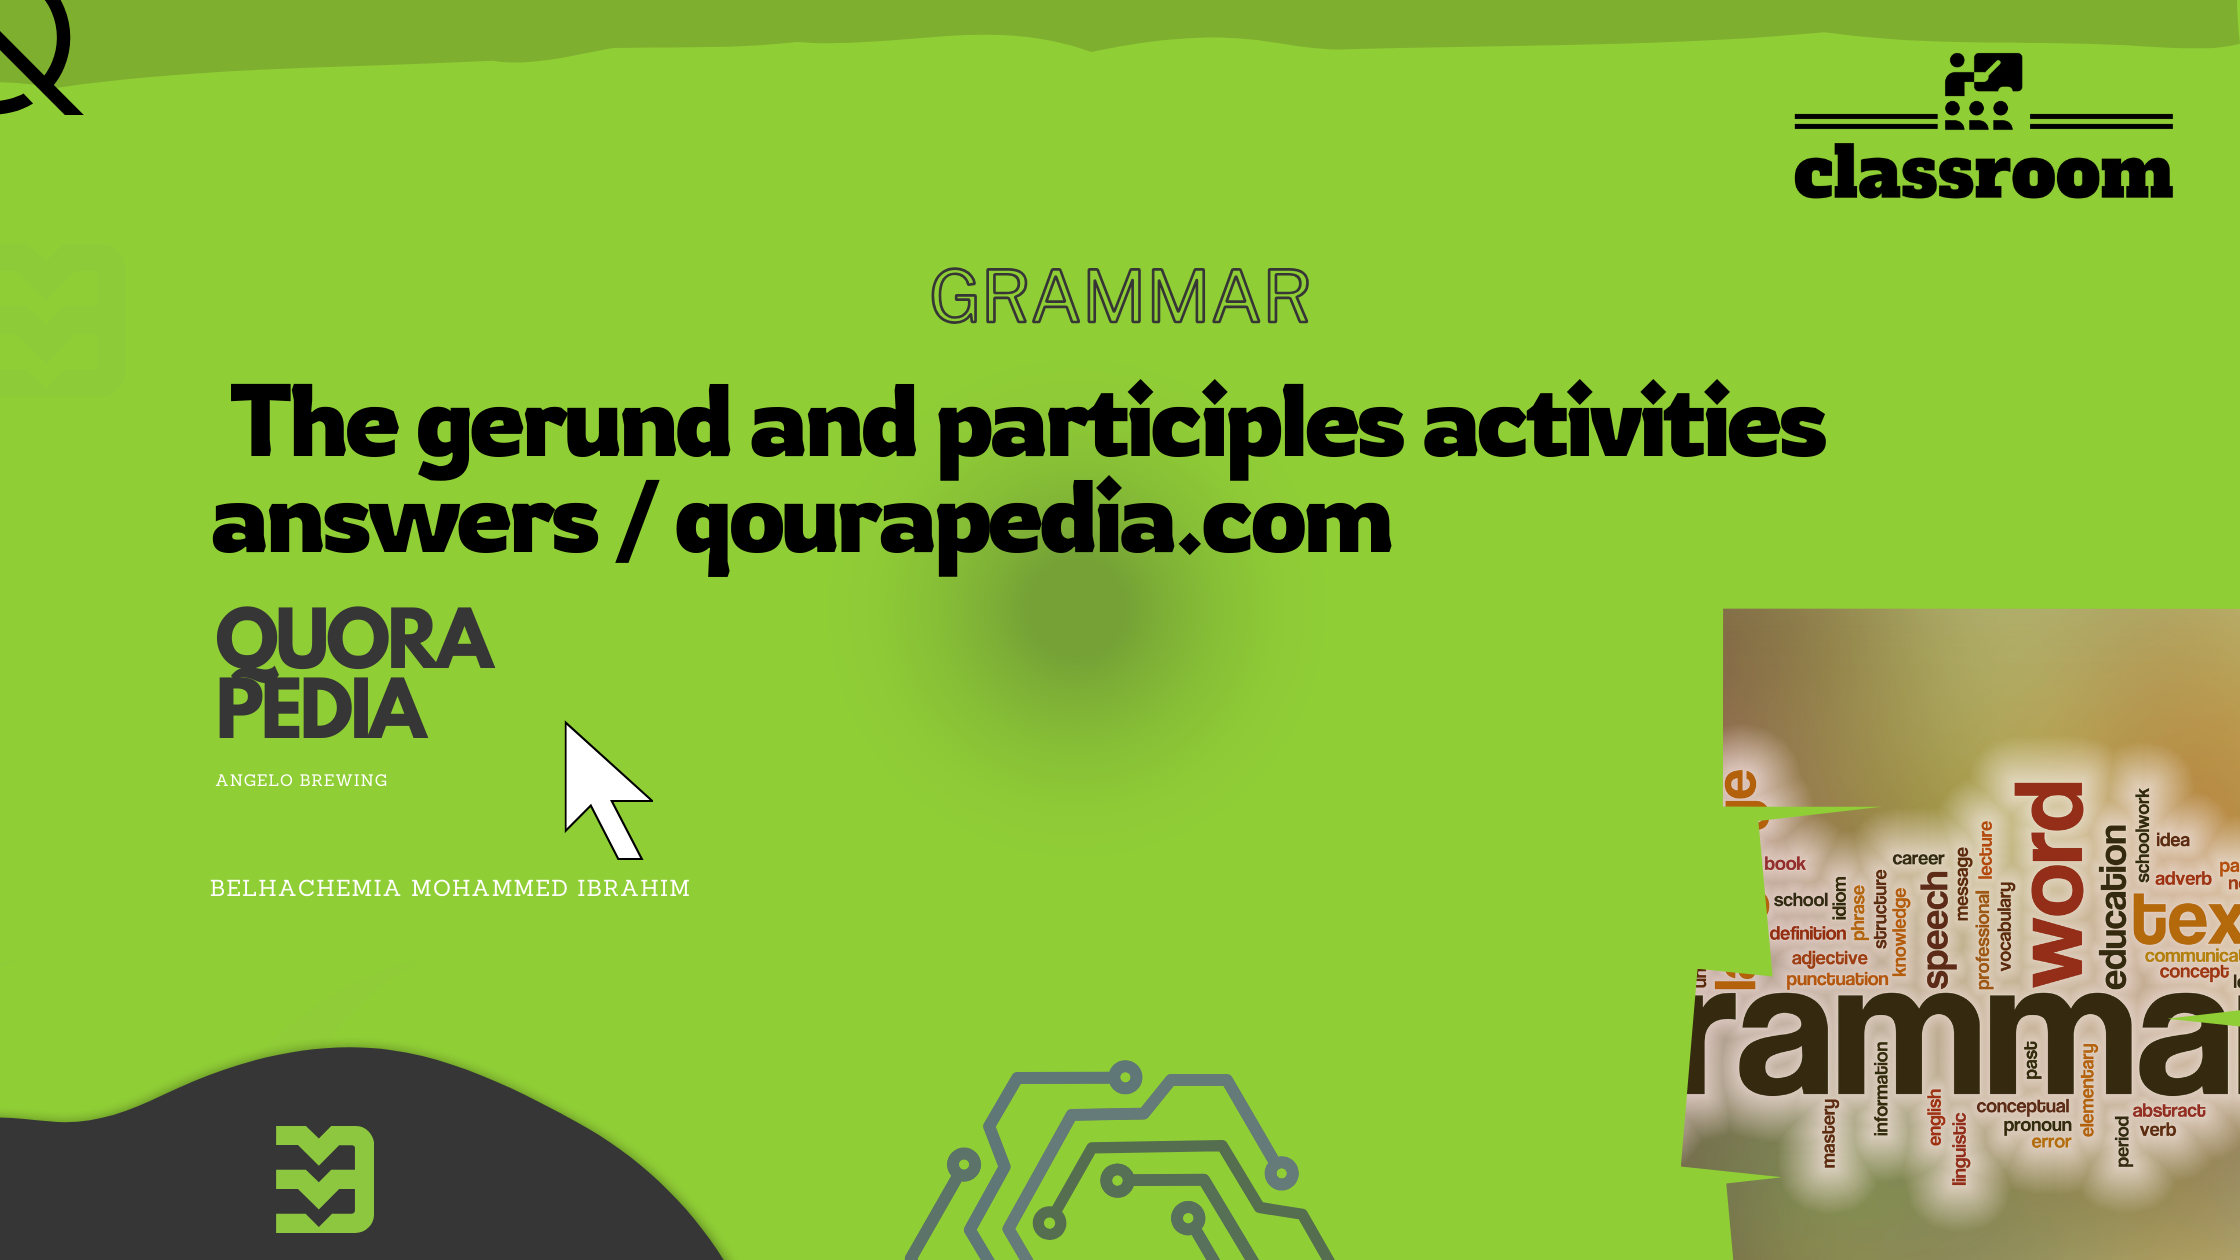 The gerund and participles activities answers / qourapedia.com